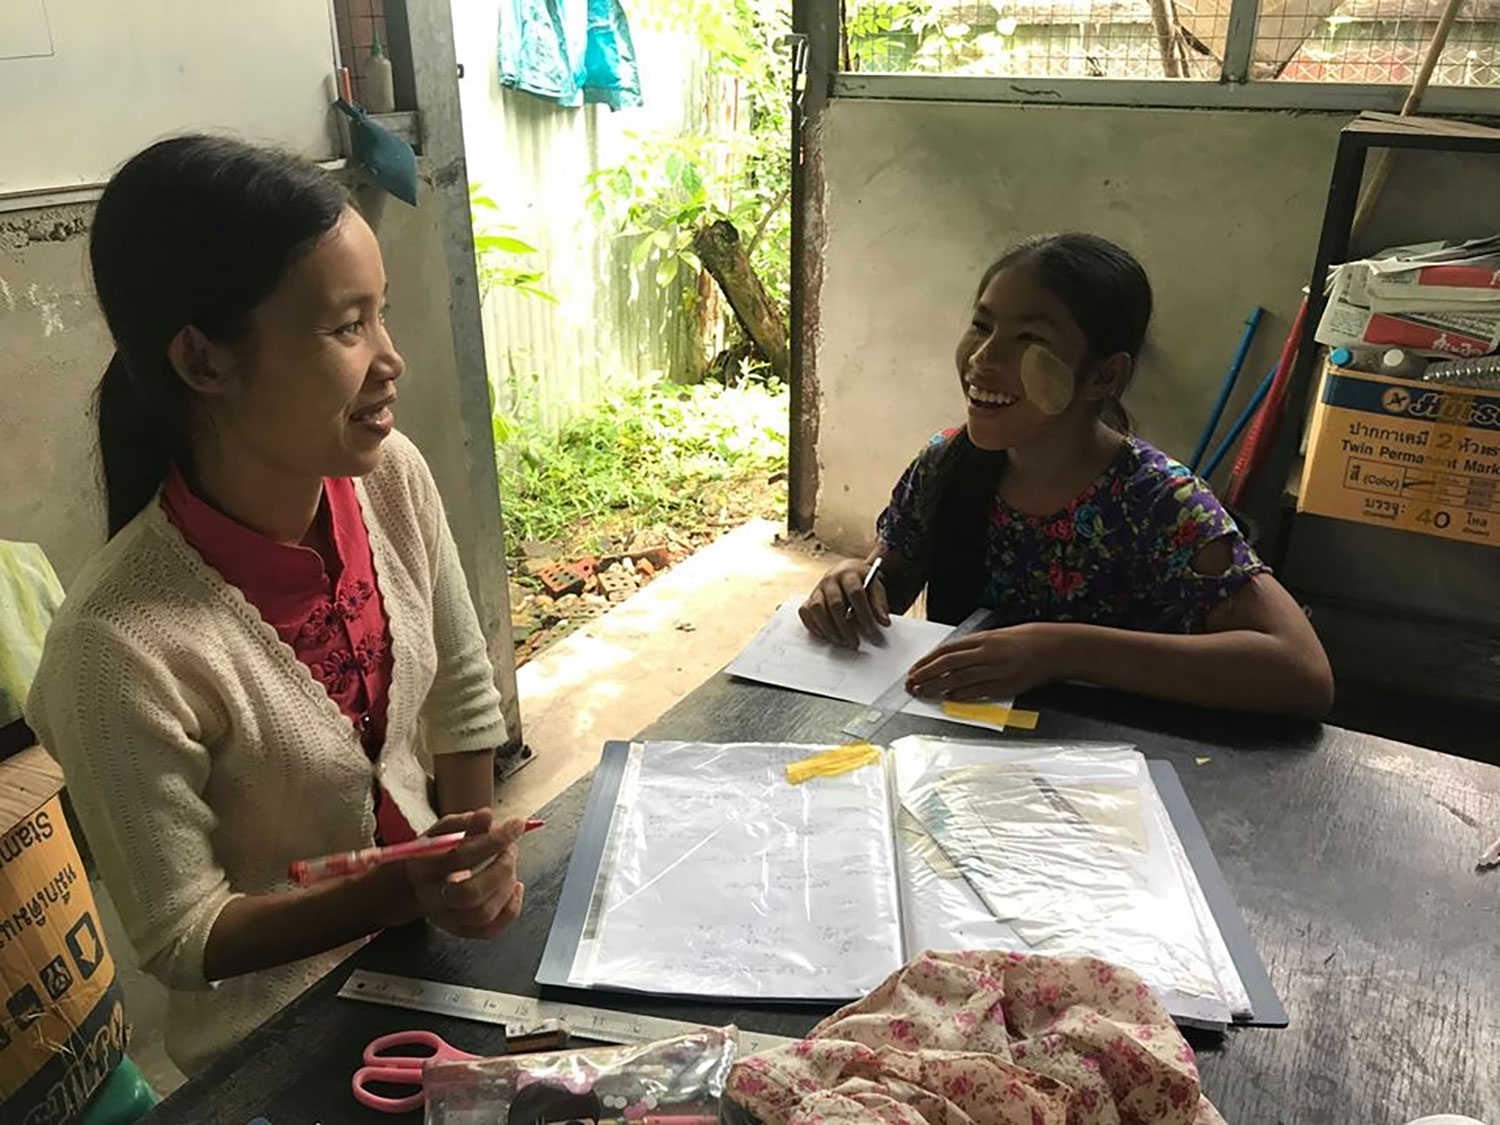 Child Labour in Focus: A Former Underage Worker's Sewing Talent Doesn't go Unnoticed in Myanmar